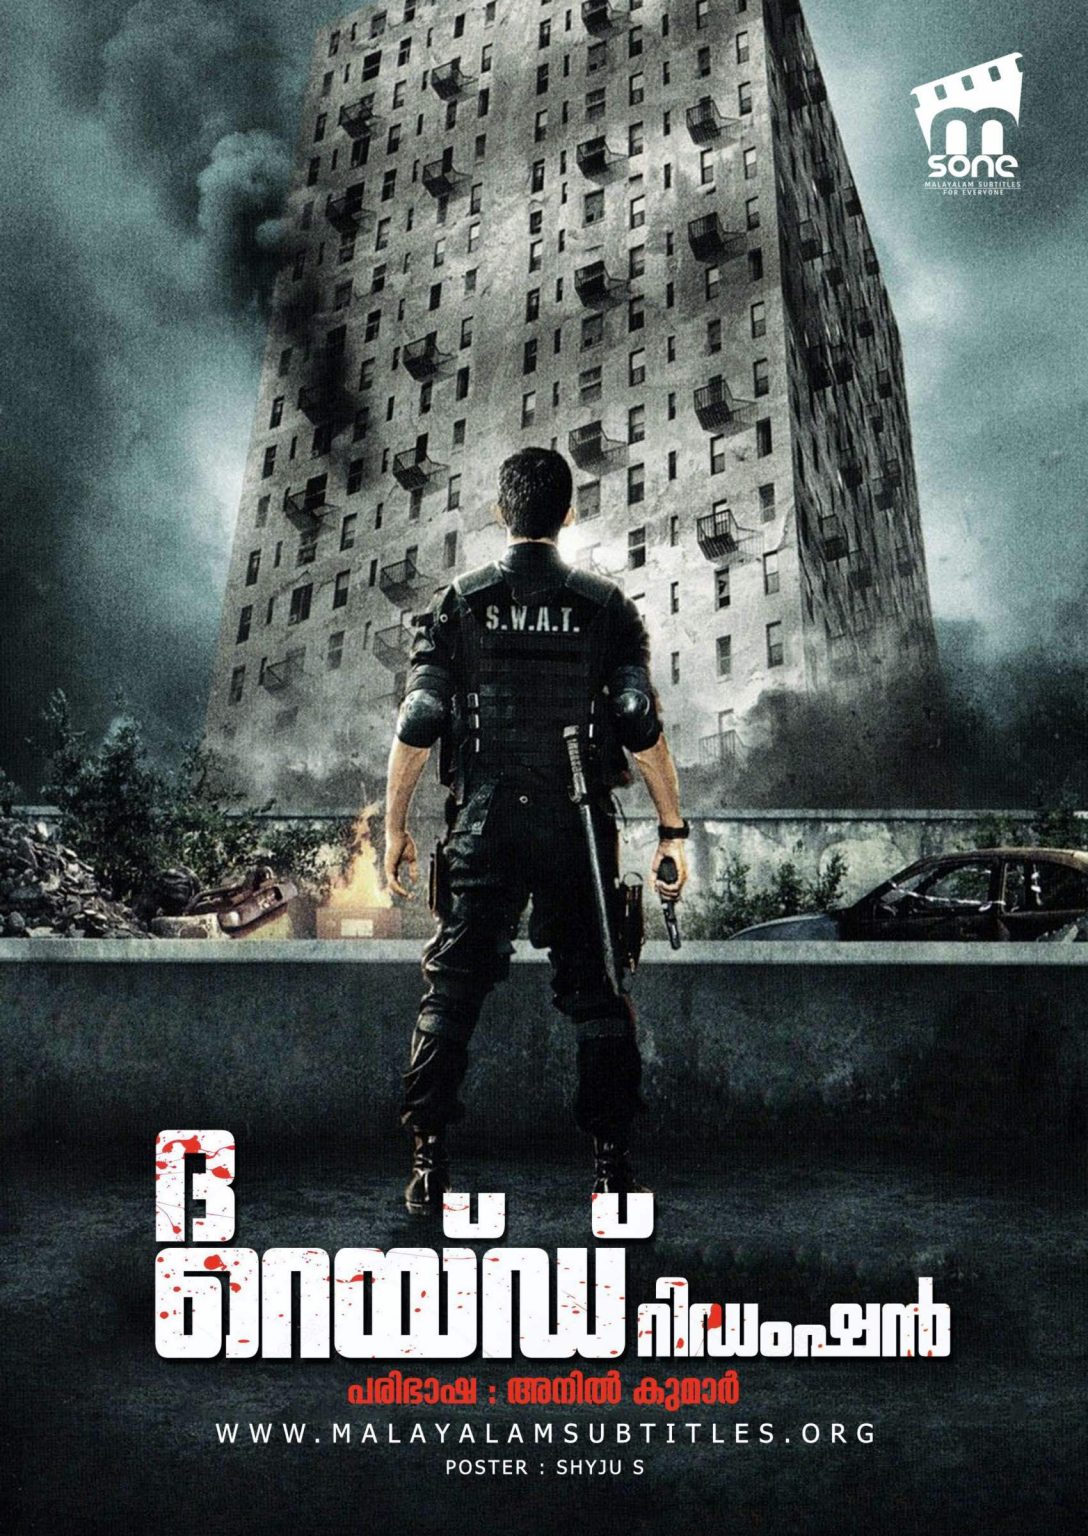 watch the raid redemption online subbed free